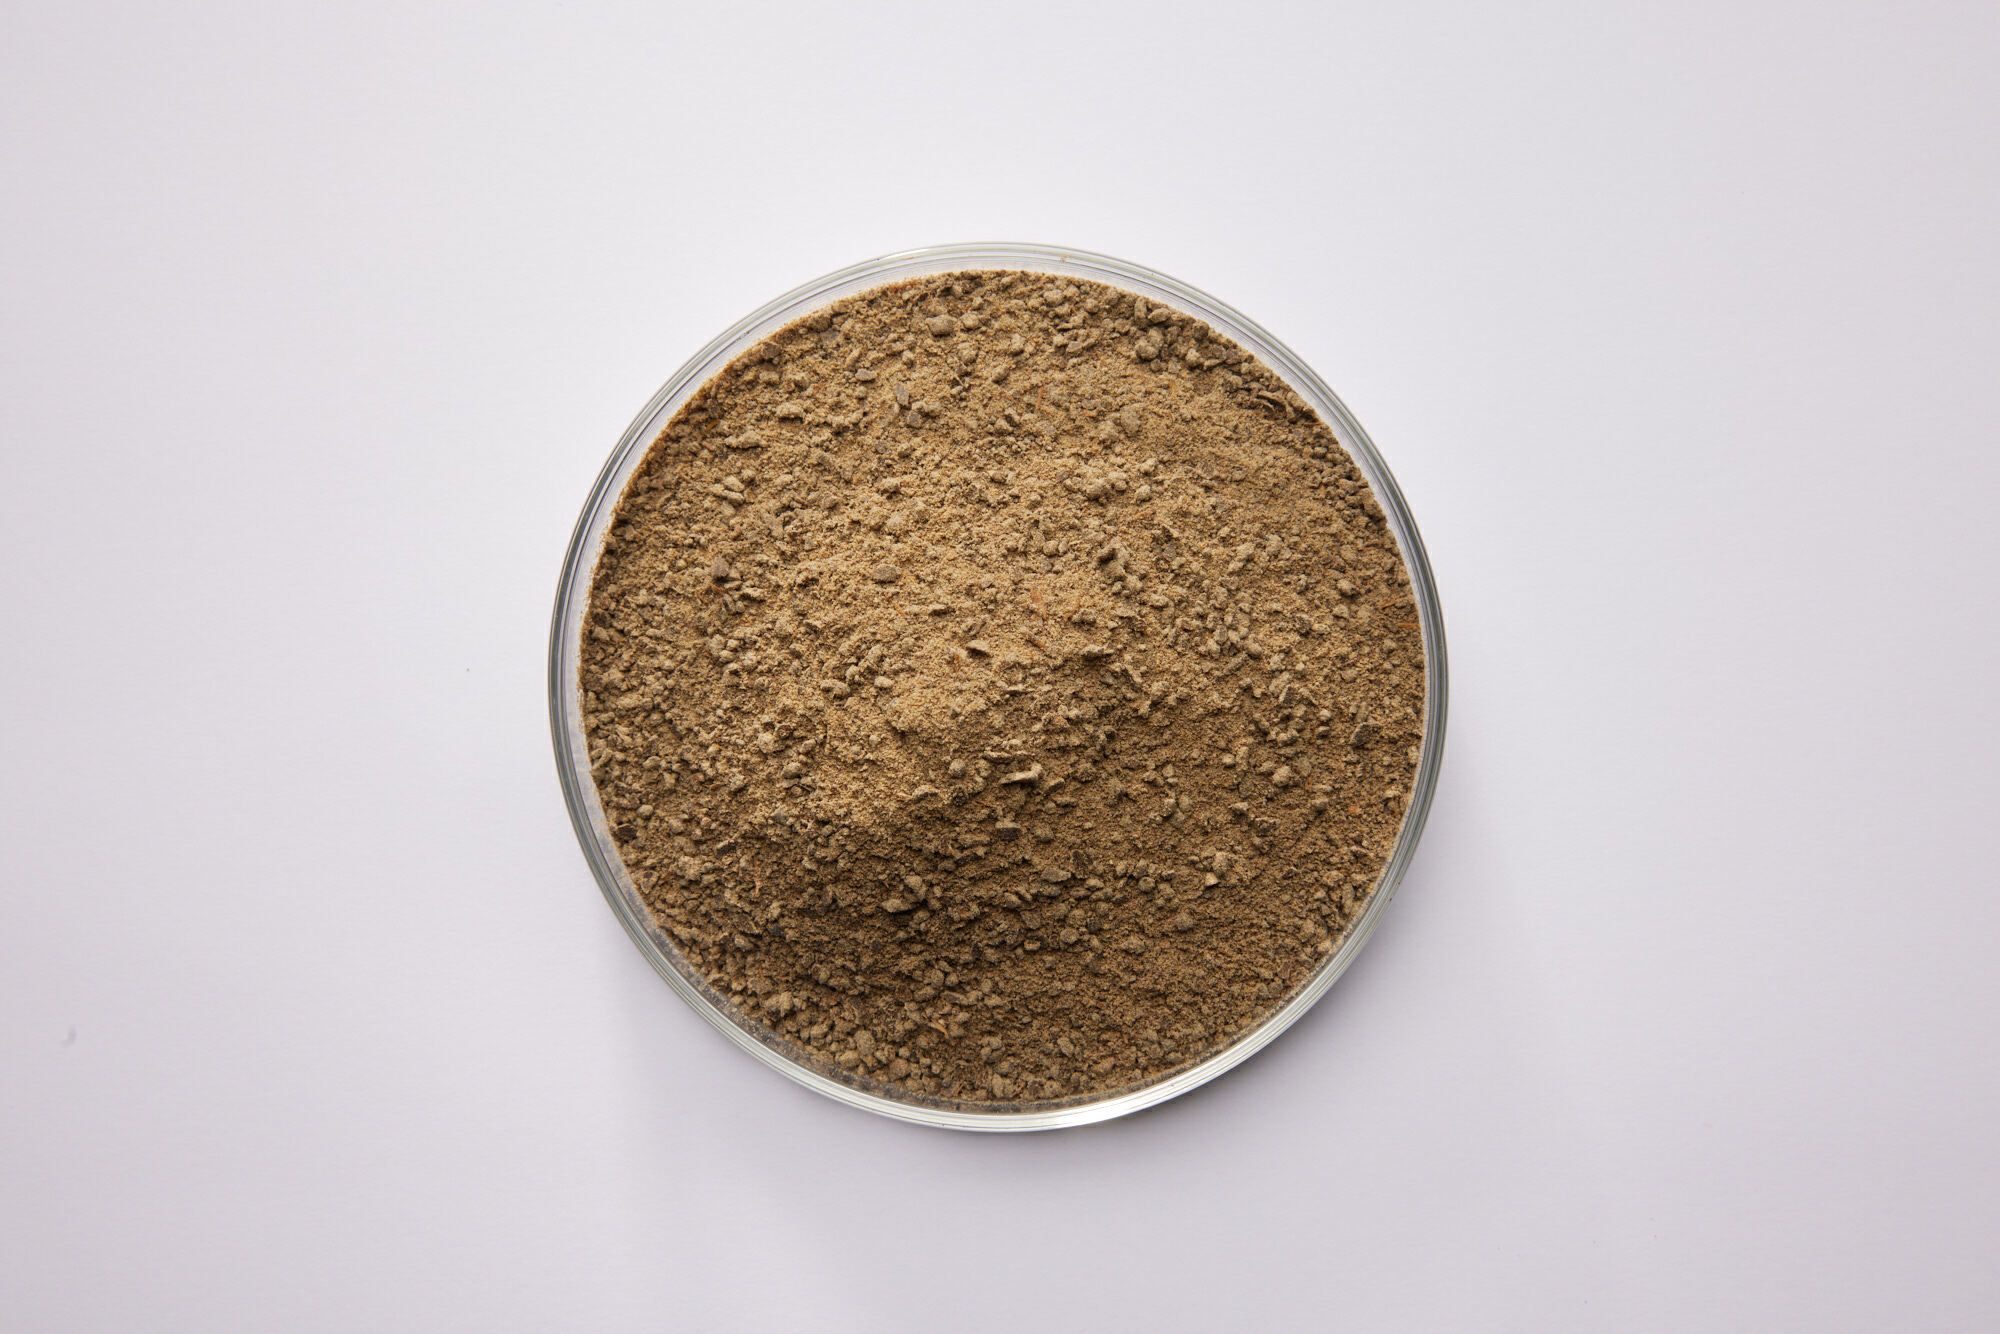 Earthy powder in a petri dish on a white background